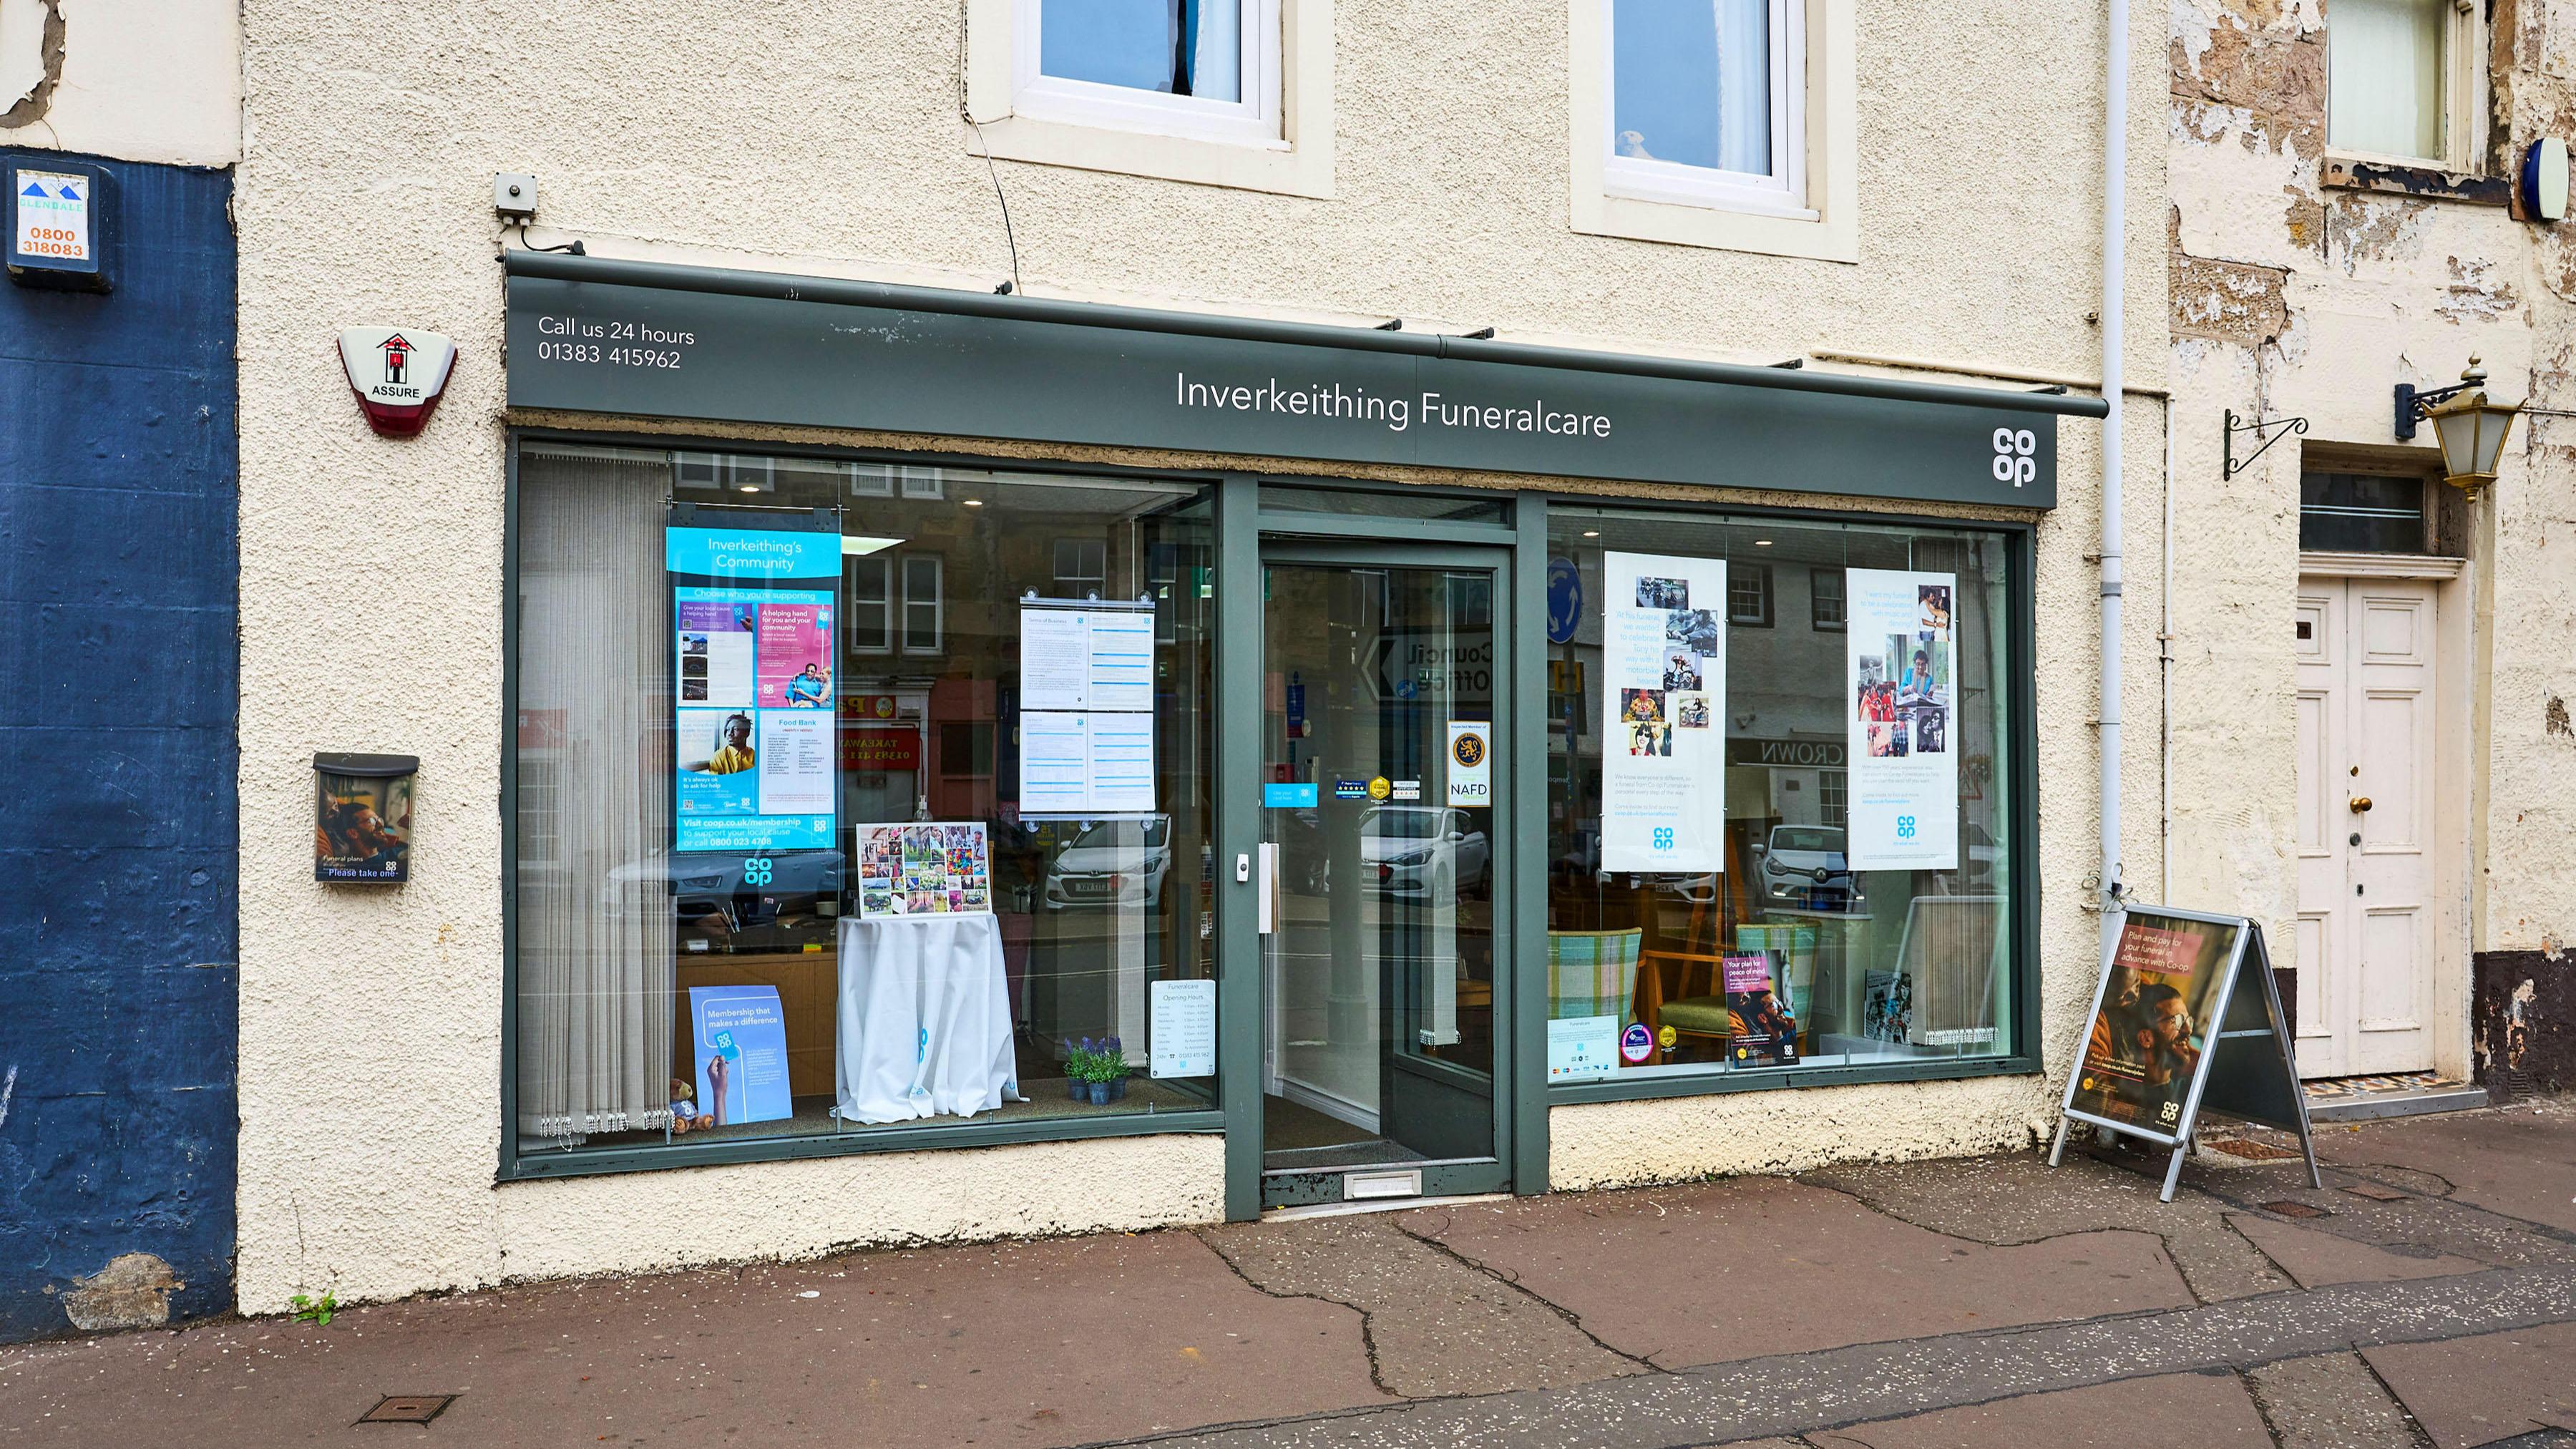 Images Inverkeithing Funeralcare